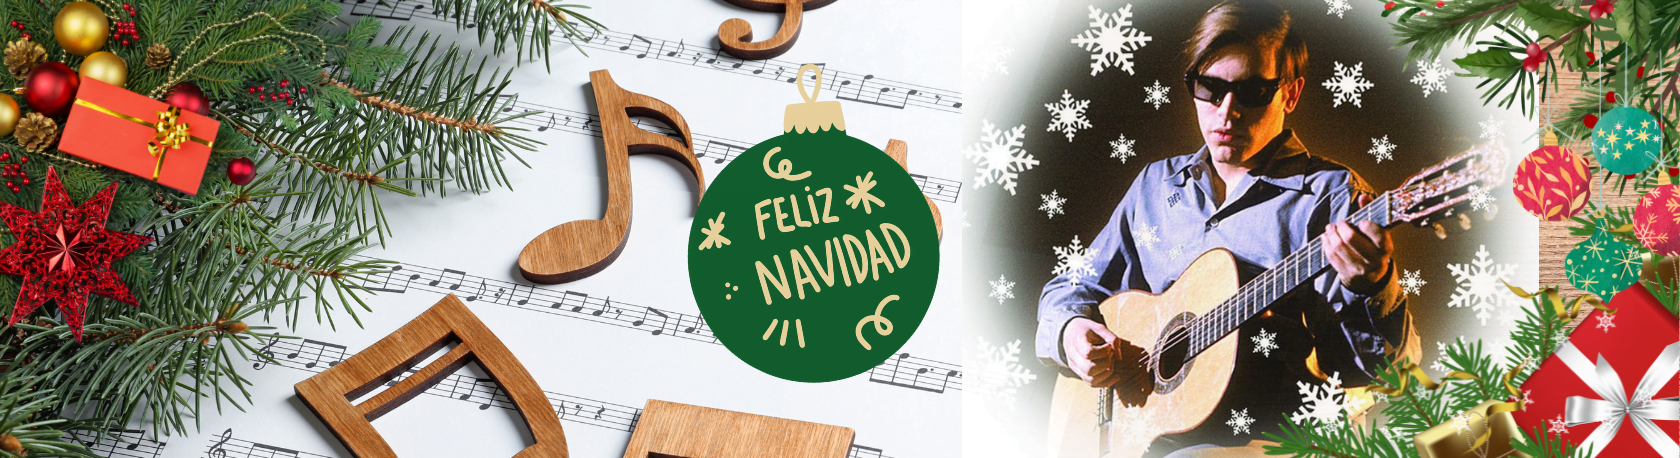 Improve your Spanish vocabulary & listening skills while learning about one of the most popular Christmas songs